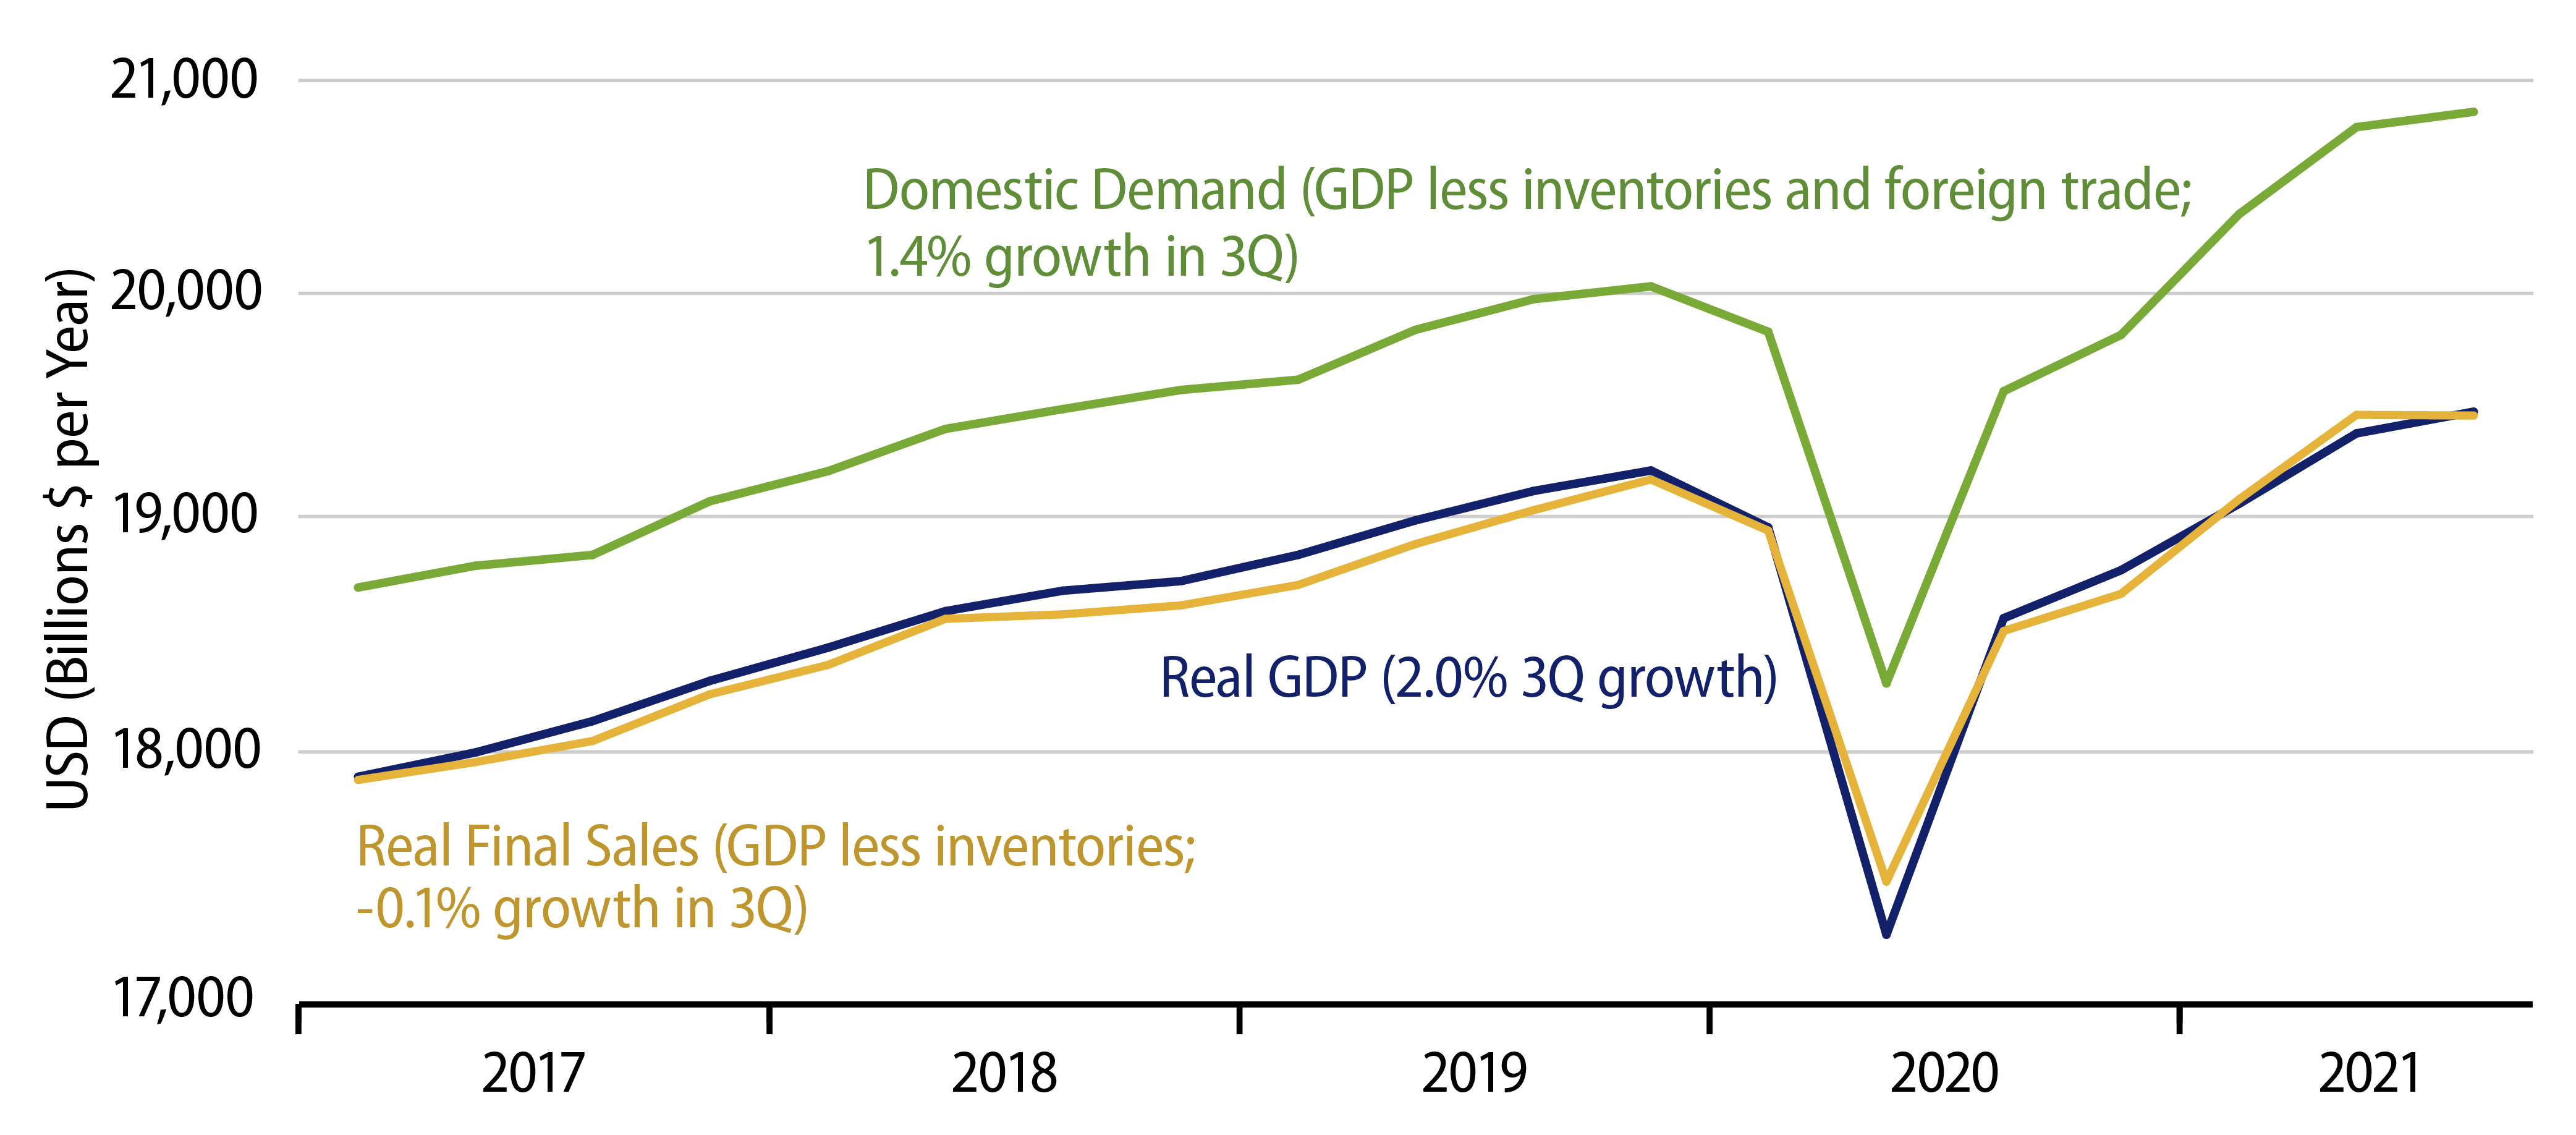 Real GDP and Major Features